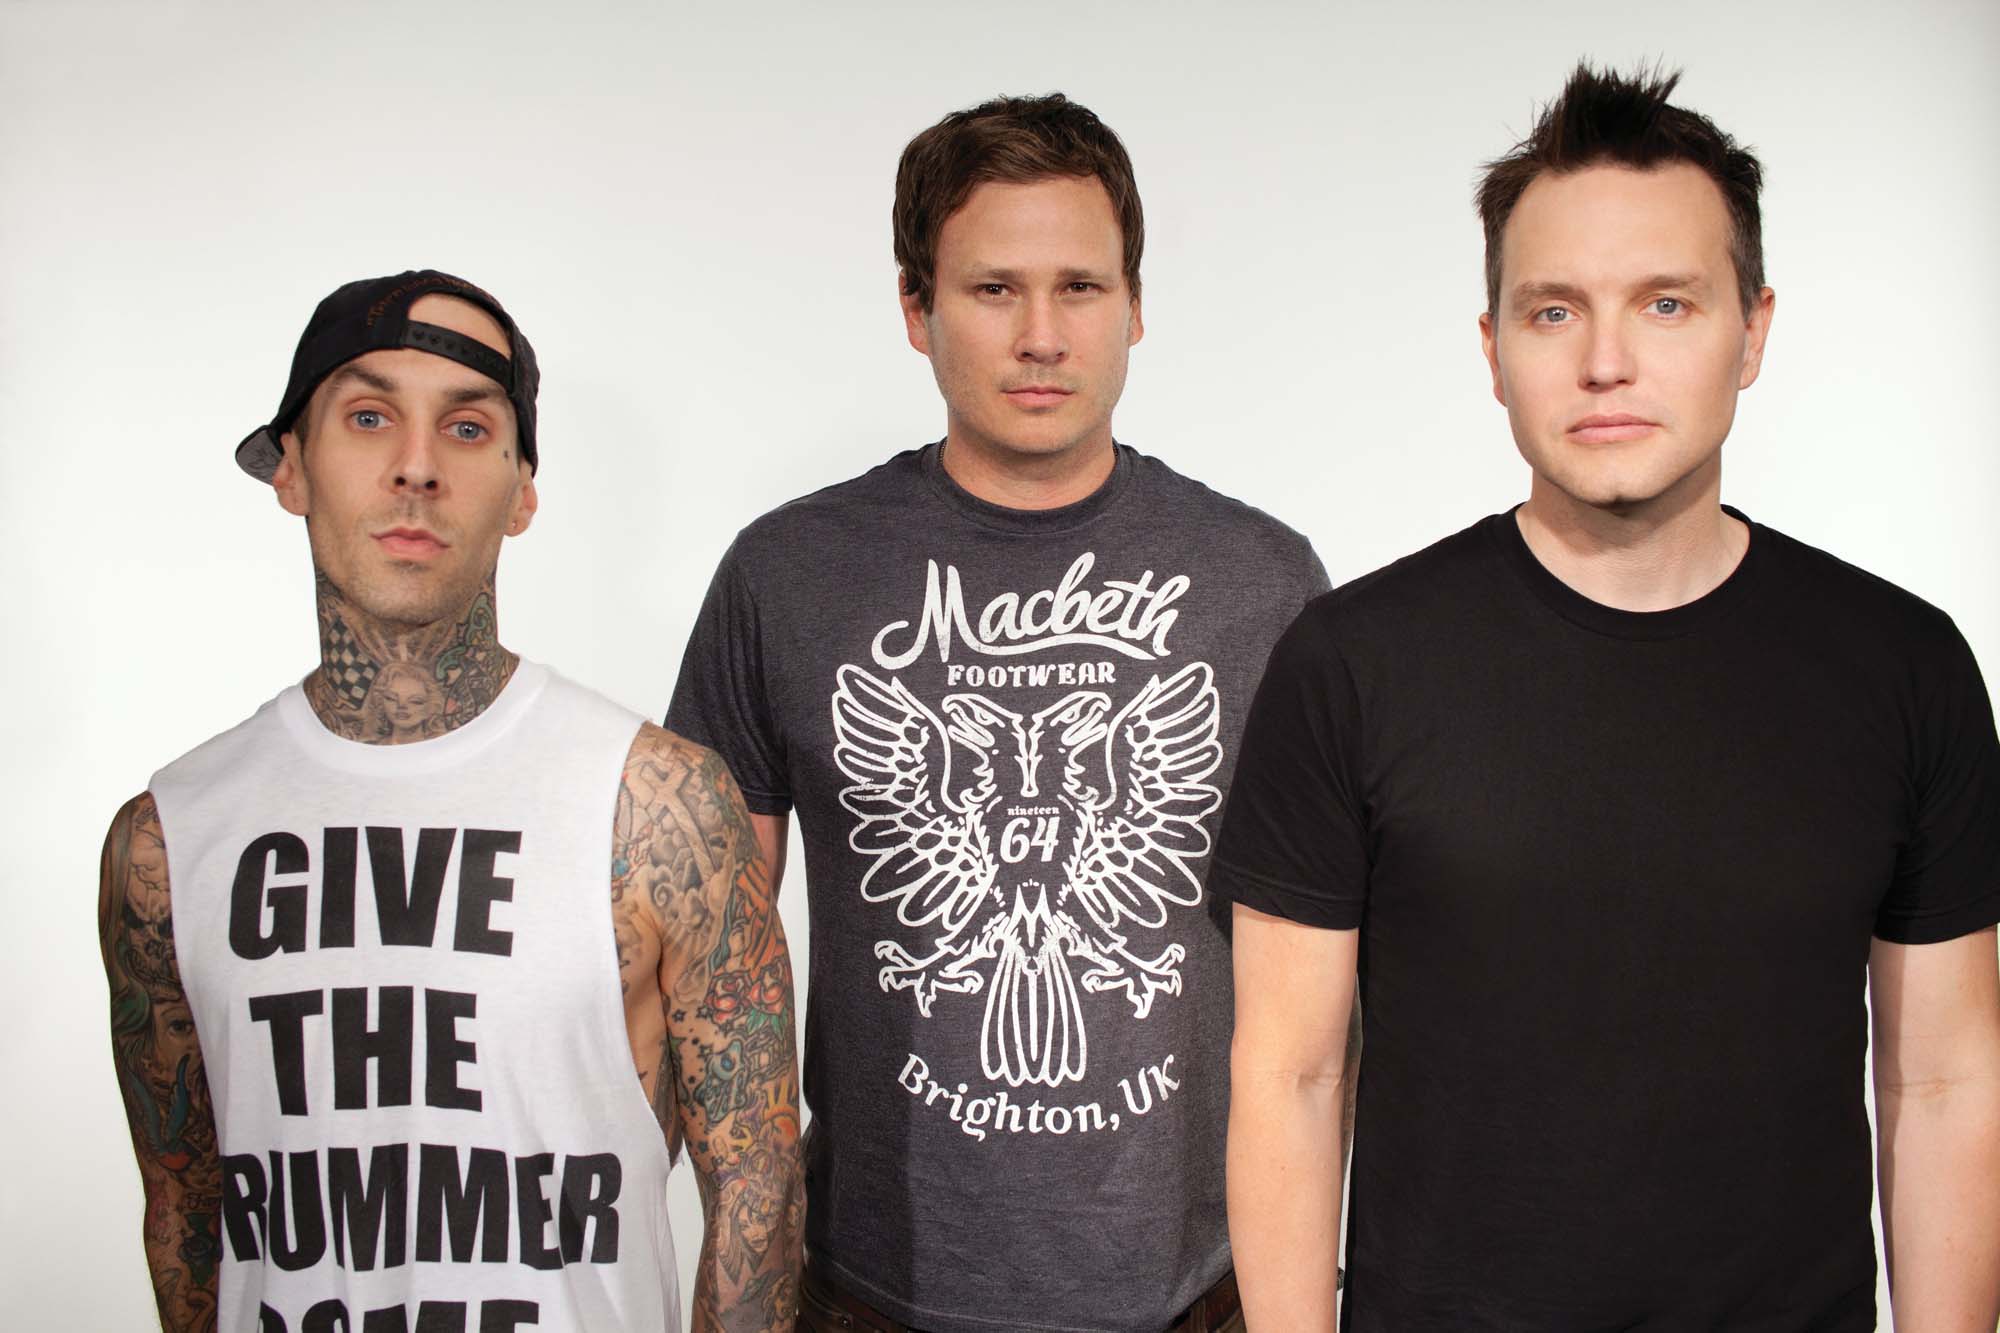 Tom DeLonge: “If I wanted to, I could be back in Blink in a period of days”